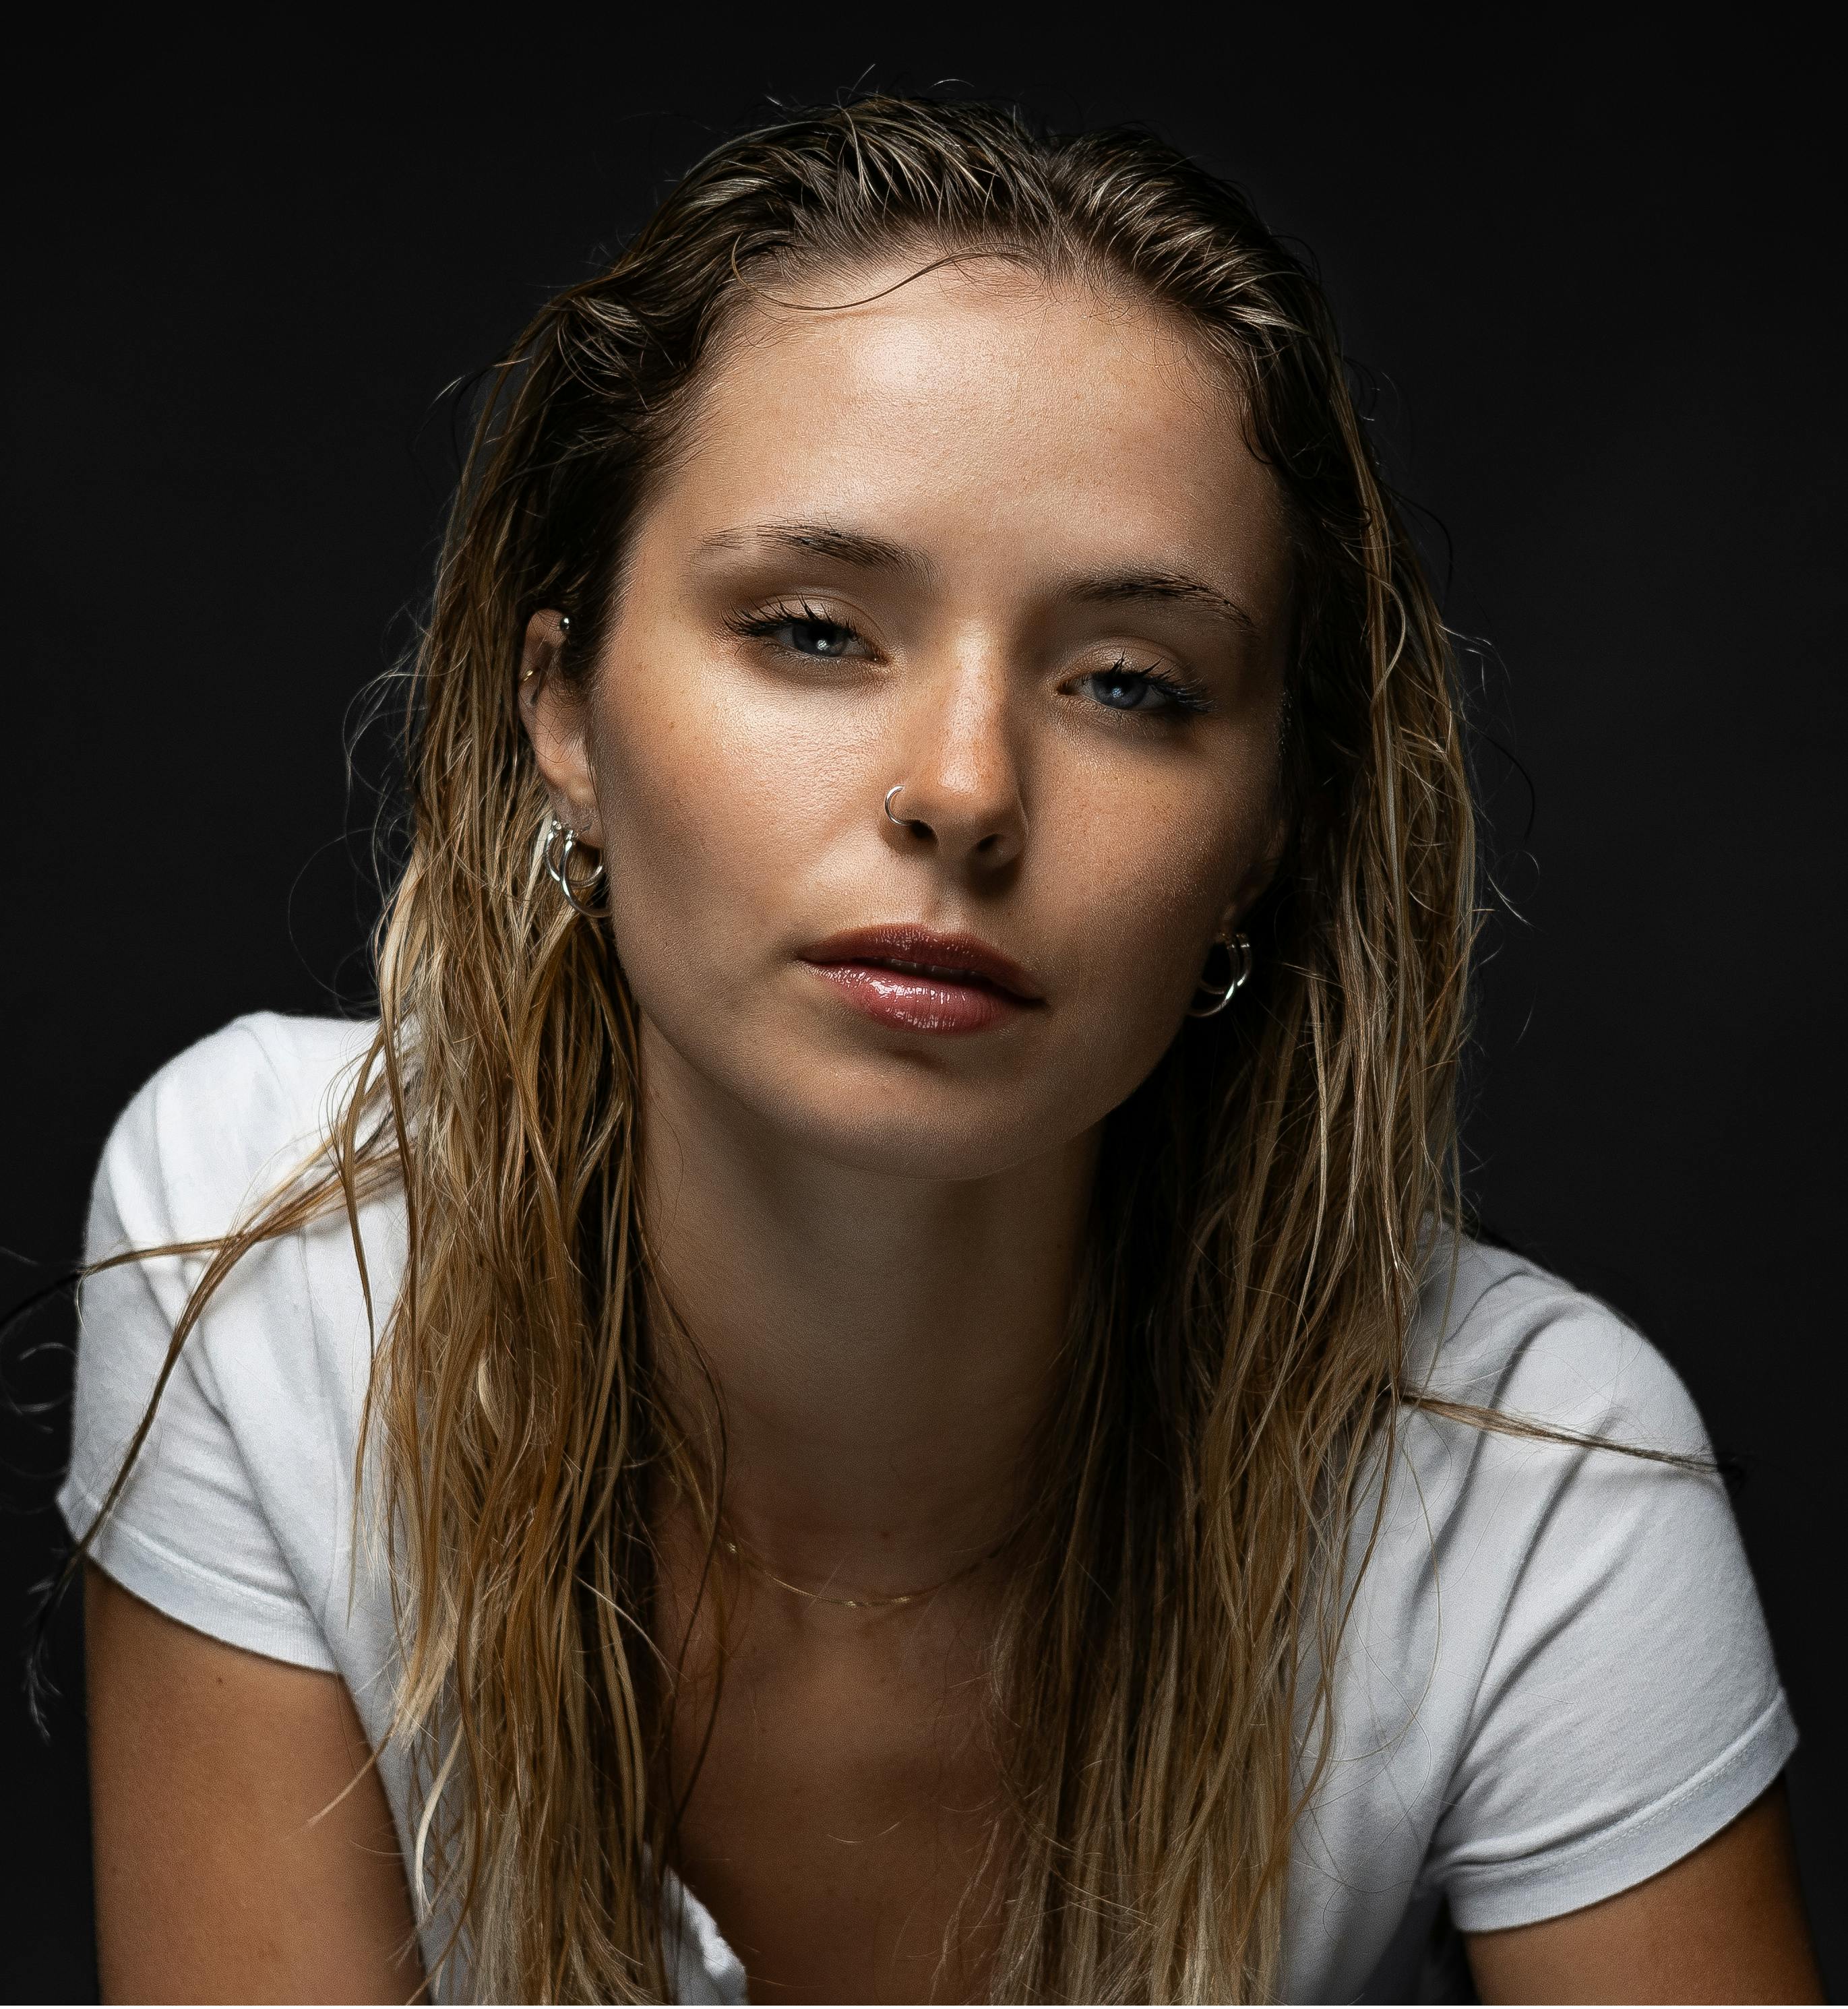 A Studio Photoshoot of a Young Woman with Wet Hair · Free Stock Photo